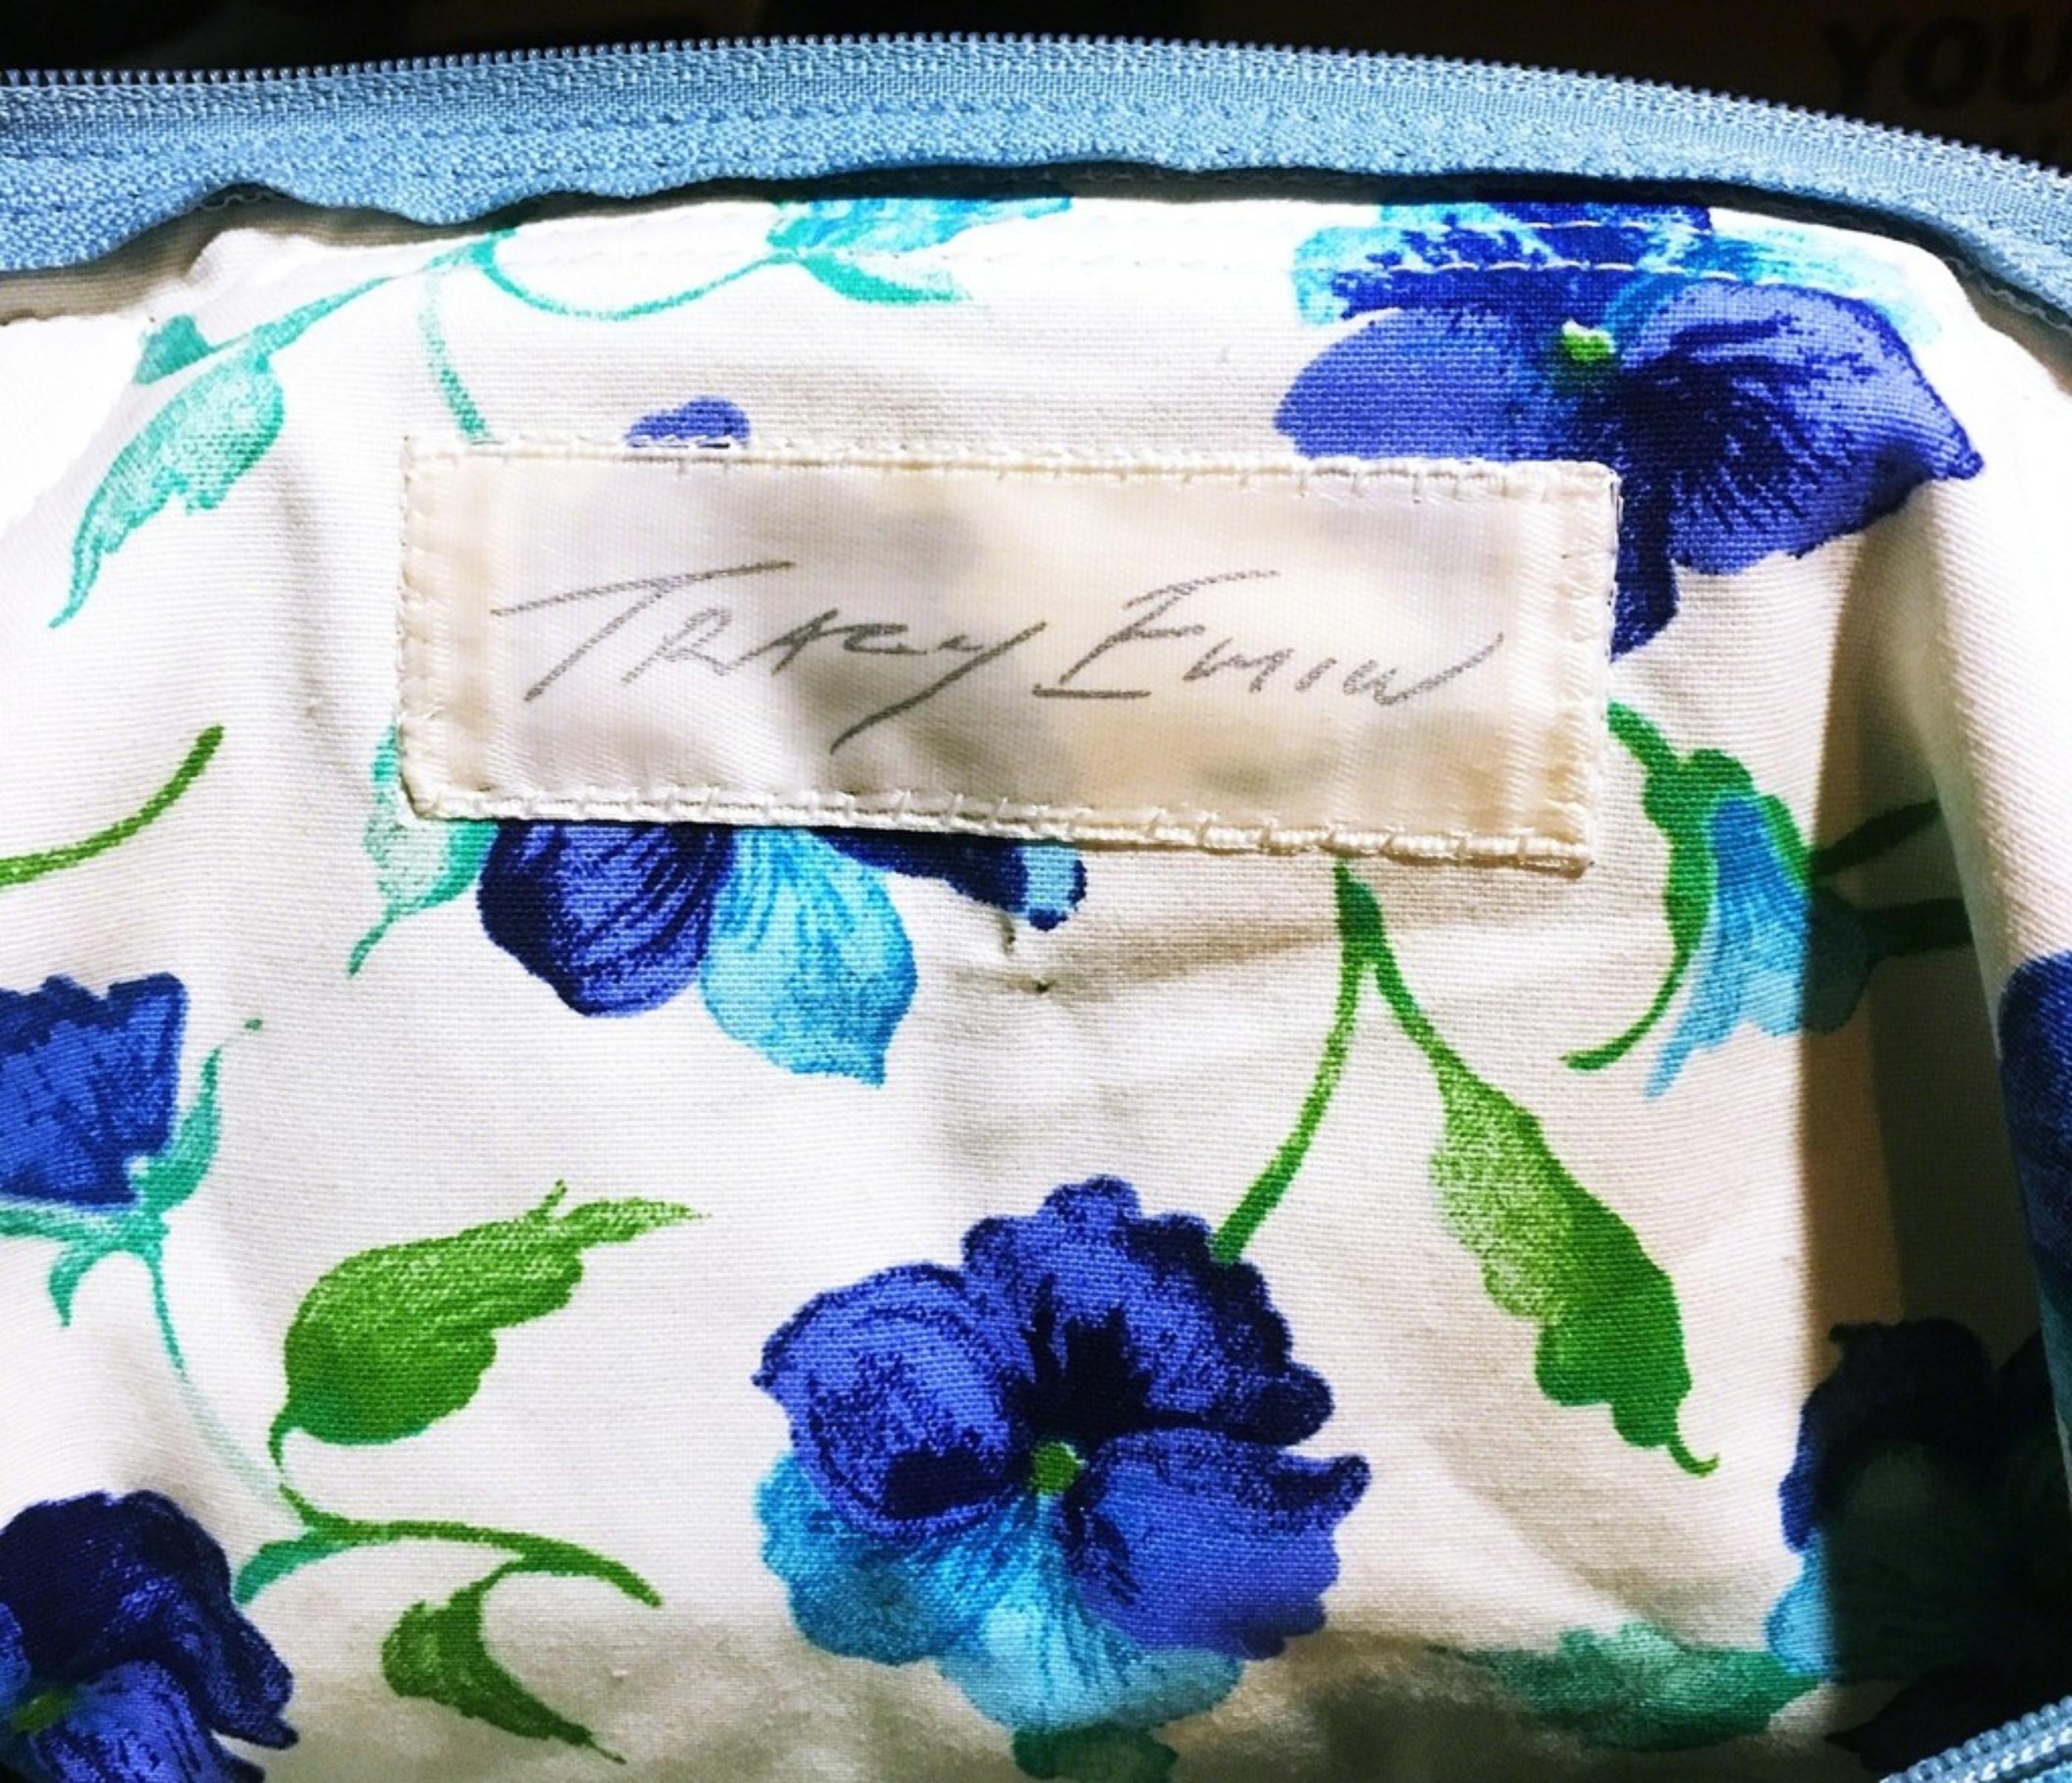 Always Me, limited edition handbag (Uniquely Hand signed & dated by Tracey Emin) For Sale 3